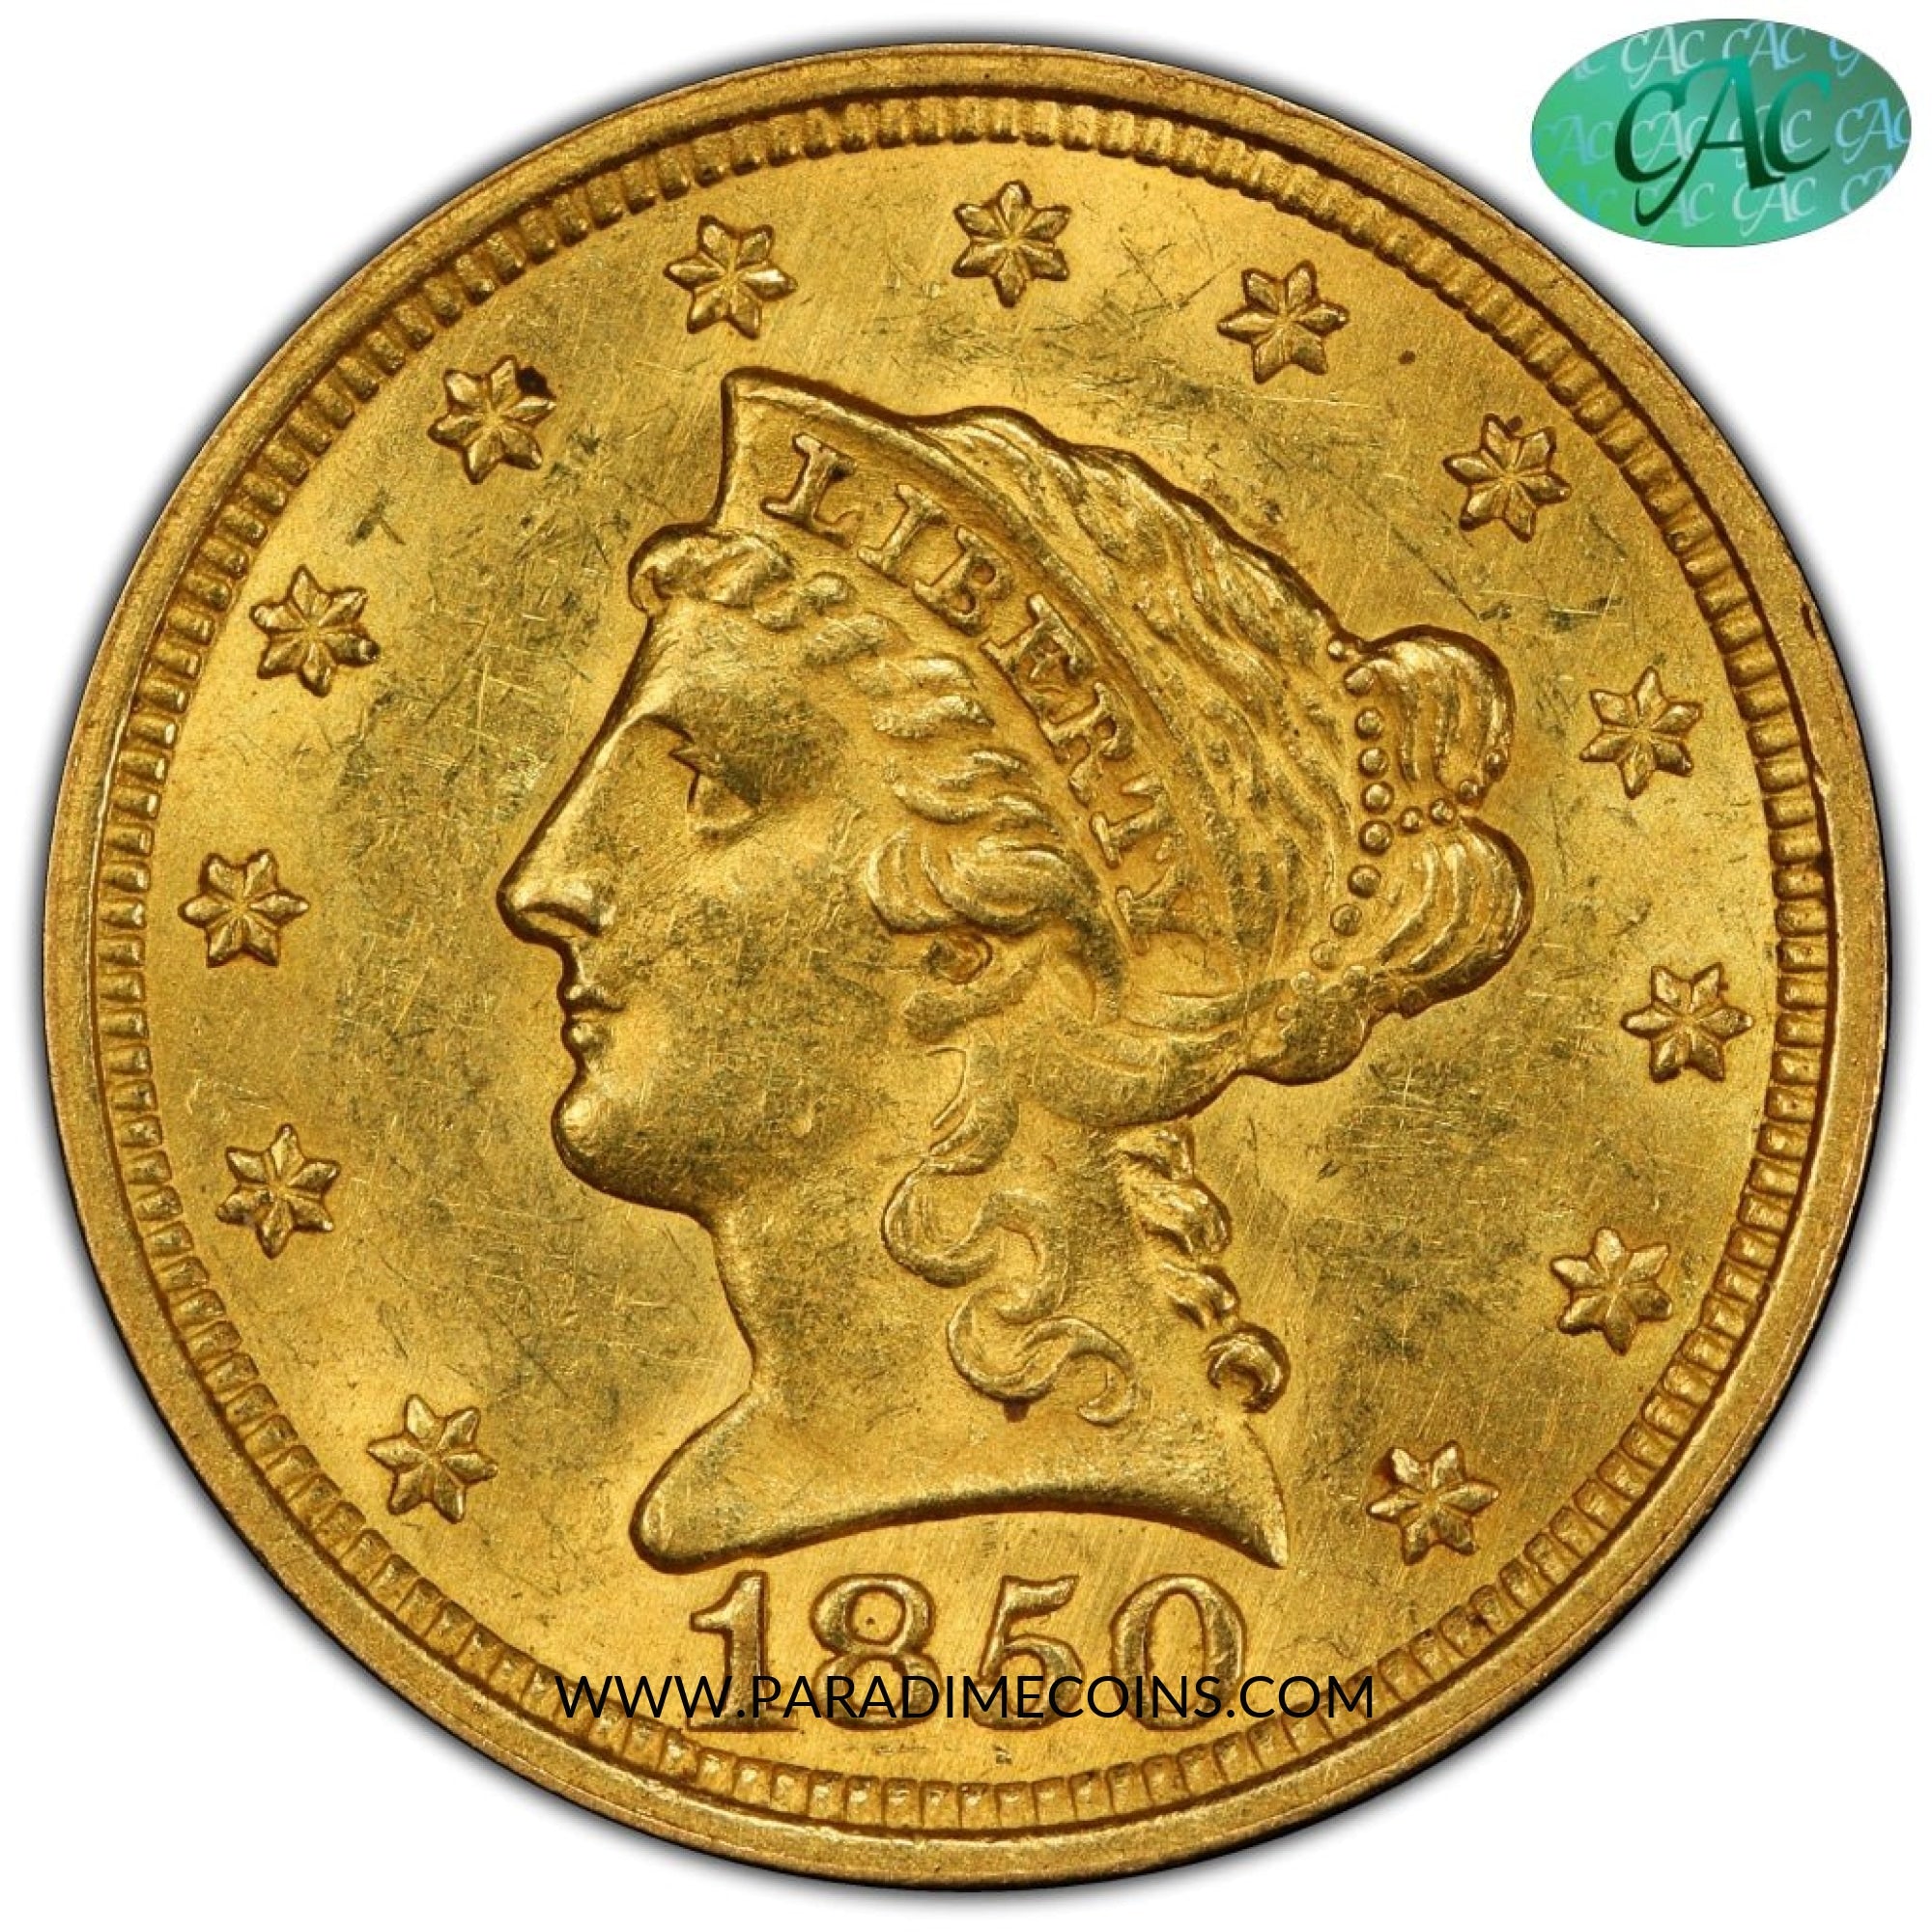 1850 $2.5 MS61 PCGS CAC - Paradime Coins | PCGS NGC CACG CAC Rare US Numismatic Coins For Sale